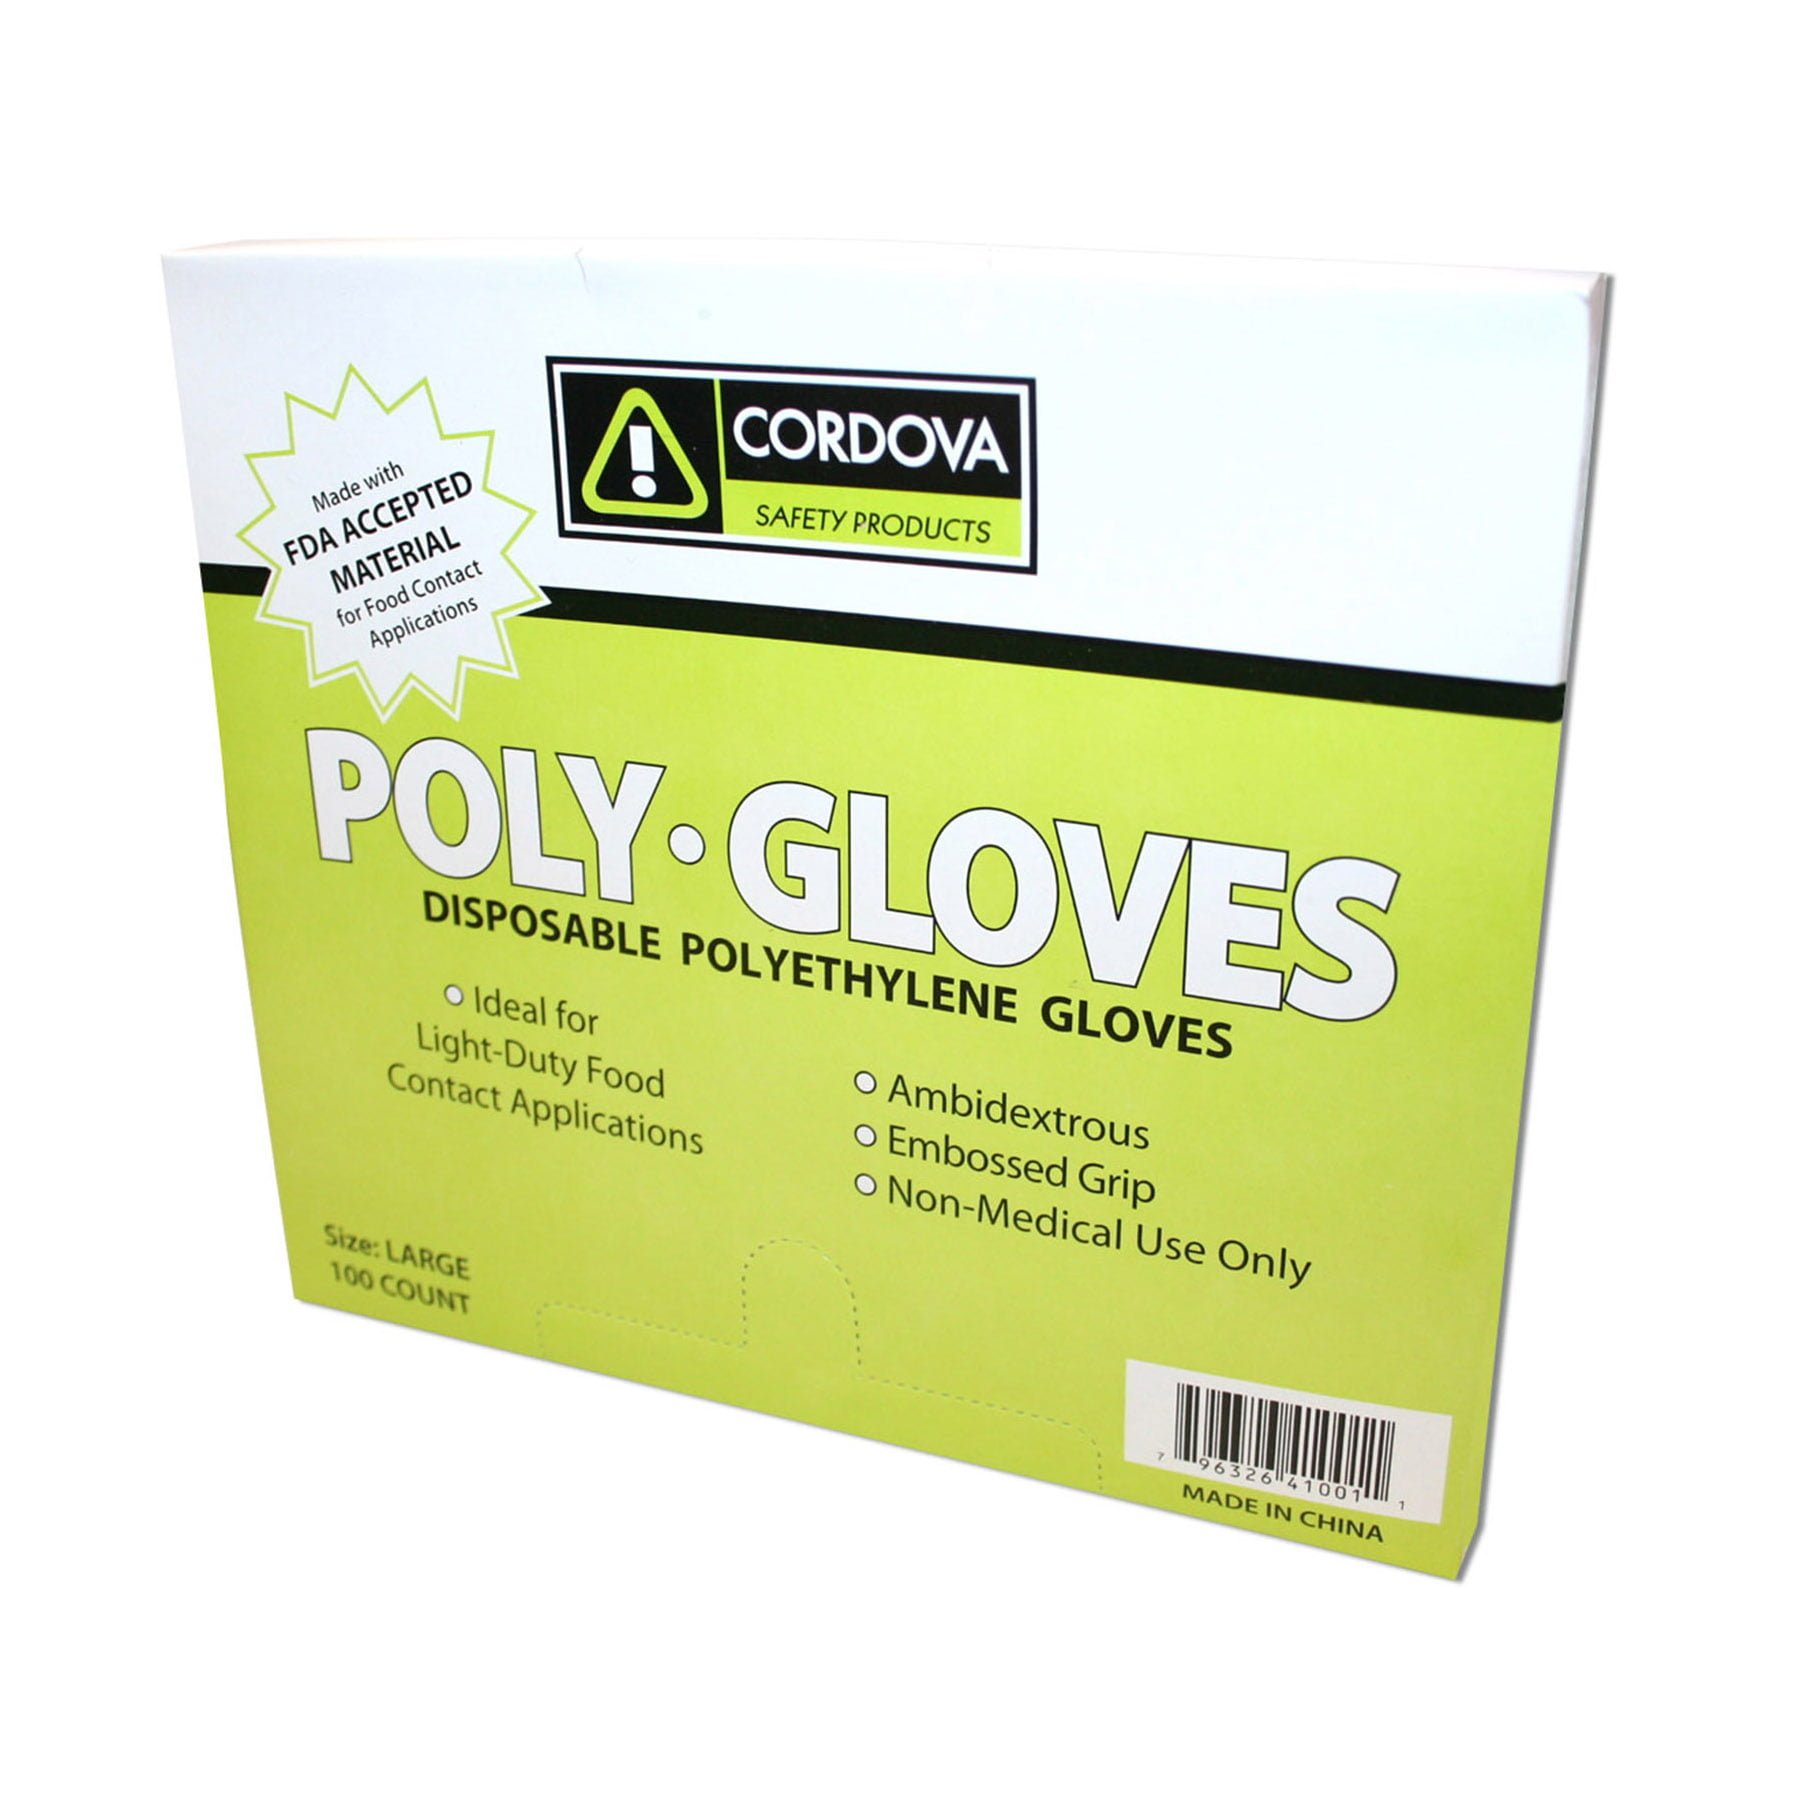 Disposable, Polybag, Low-Density, 30″L, Clear: #4130L